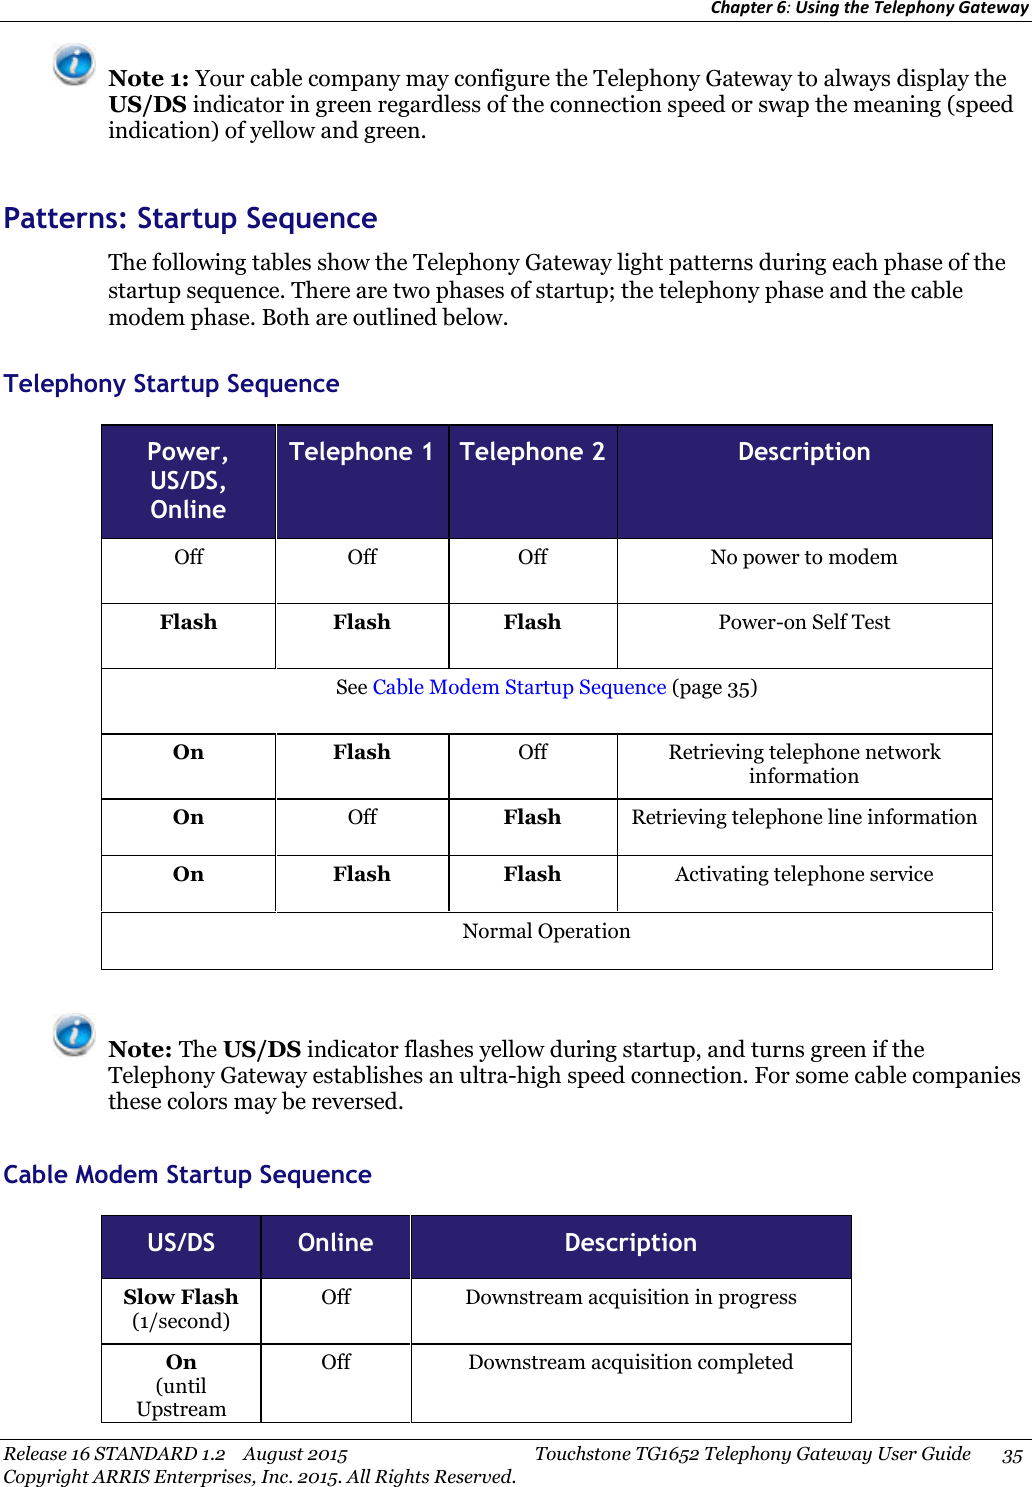 Chapter 6:Using the Telephony GatewayRelease 16 STANDARD 1.2 August 2015 Touchstone TG1652 Telephony Gateway User Guide 35Copyright ARRIS Enterprises, Inc. 2015. All Rights Reserved.Note 1: Your cable company may configure the Telephony Gateway to always display theUS/DS indicator in green regardless of the connection speed or swap the meaning (speedindication) of yellow and green.Patterns: Startup SequenceThe following tables show the Telephony Gateway light patterns during each phase of thestartup sequence. There are two phases of startup; the telephony phase and the cablemodem phase. Both are outlined below.Telephony Startup SequencePower,US/DS,OnlineTelephone 1 Telephone 2 DescriptionOff Off Off No power to modemFlash Flash Flash Power-on Self TestSee Cable Modem Startup Sequence (page 35)On Flash Off Retrieving telephone networkinformationOn Off Flash Retrieving telephone line informationOn Flash Flash Activating telephone serviceNormal OperationNote: The US/DS indicator flashes yellow during startup, and turns green if theTelephony Gateway establishes an ultra-high speed connection. For some cable companiesthese colors may be reversed.Cable Modem Startup SequenceUS/DS Online DescriptionSlow Flash(1/second)Off Downstream acquisition in progressOn(untilUpstreamOff Downstream acquisition completed